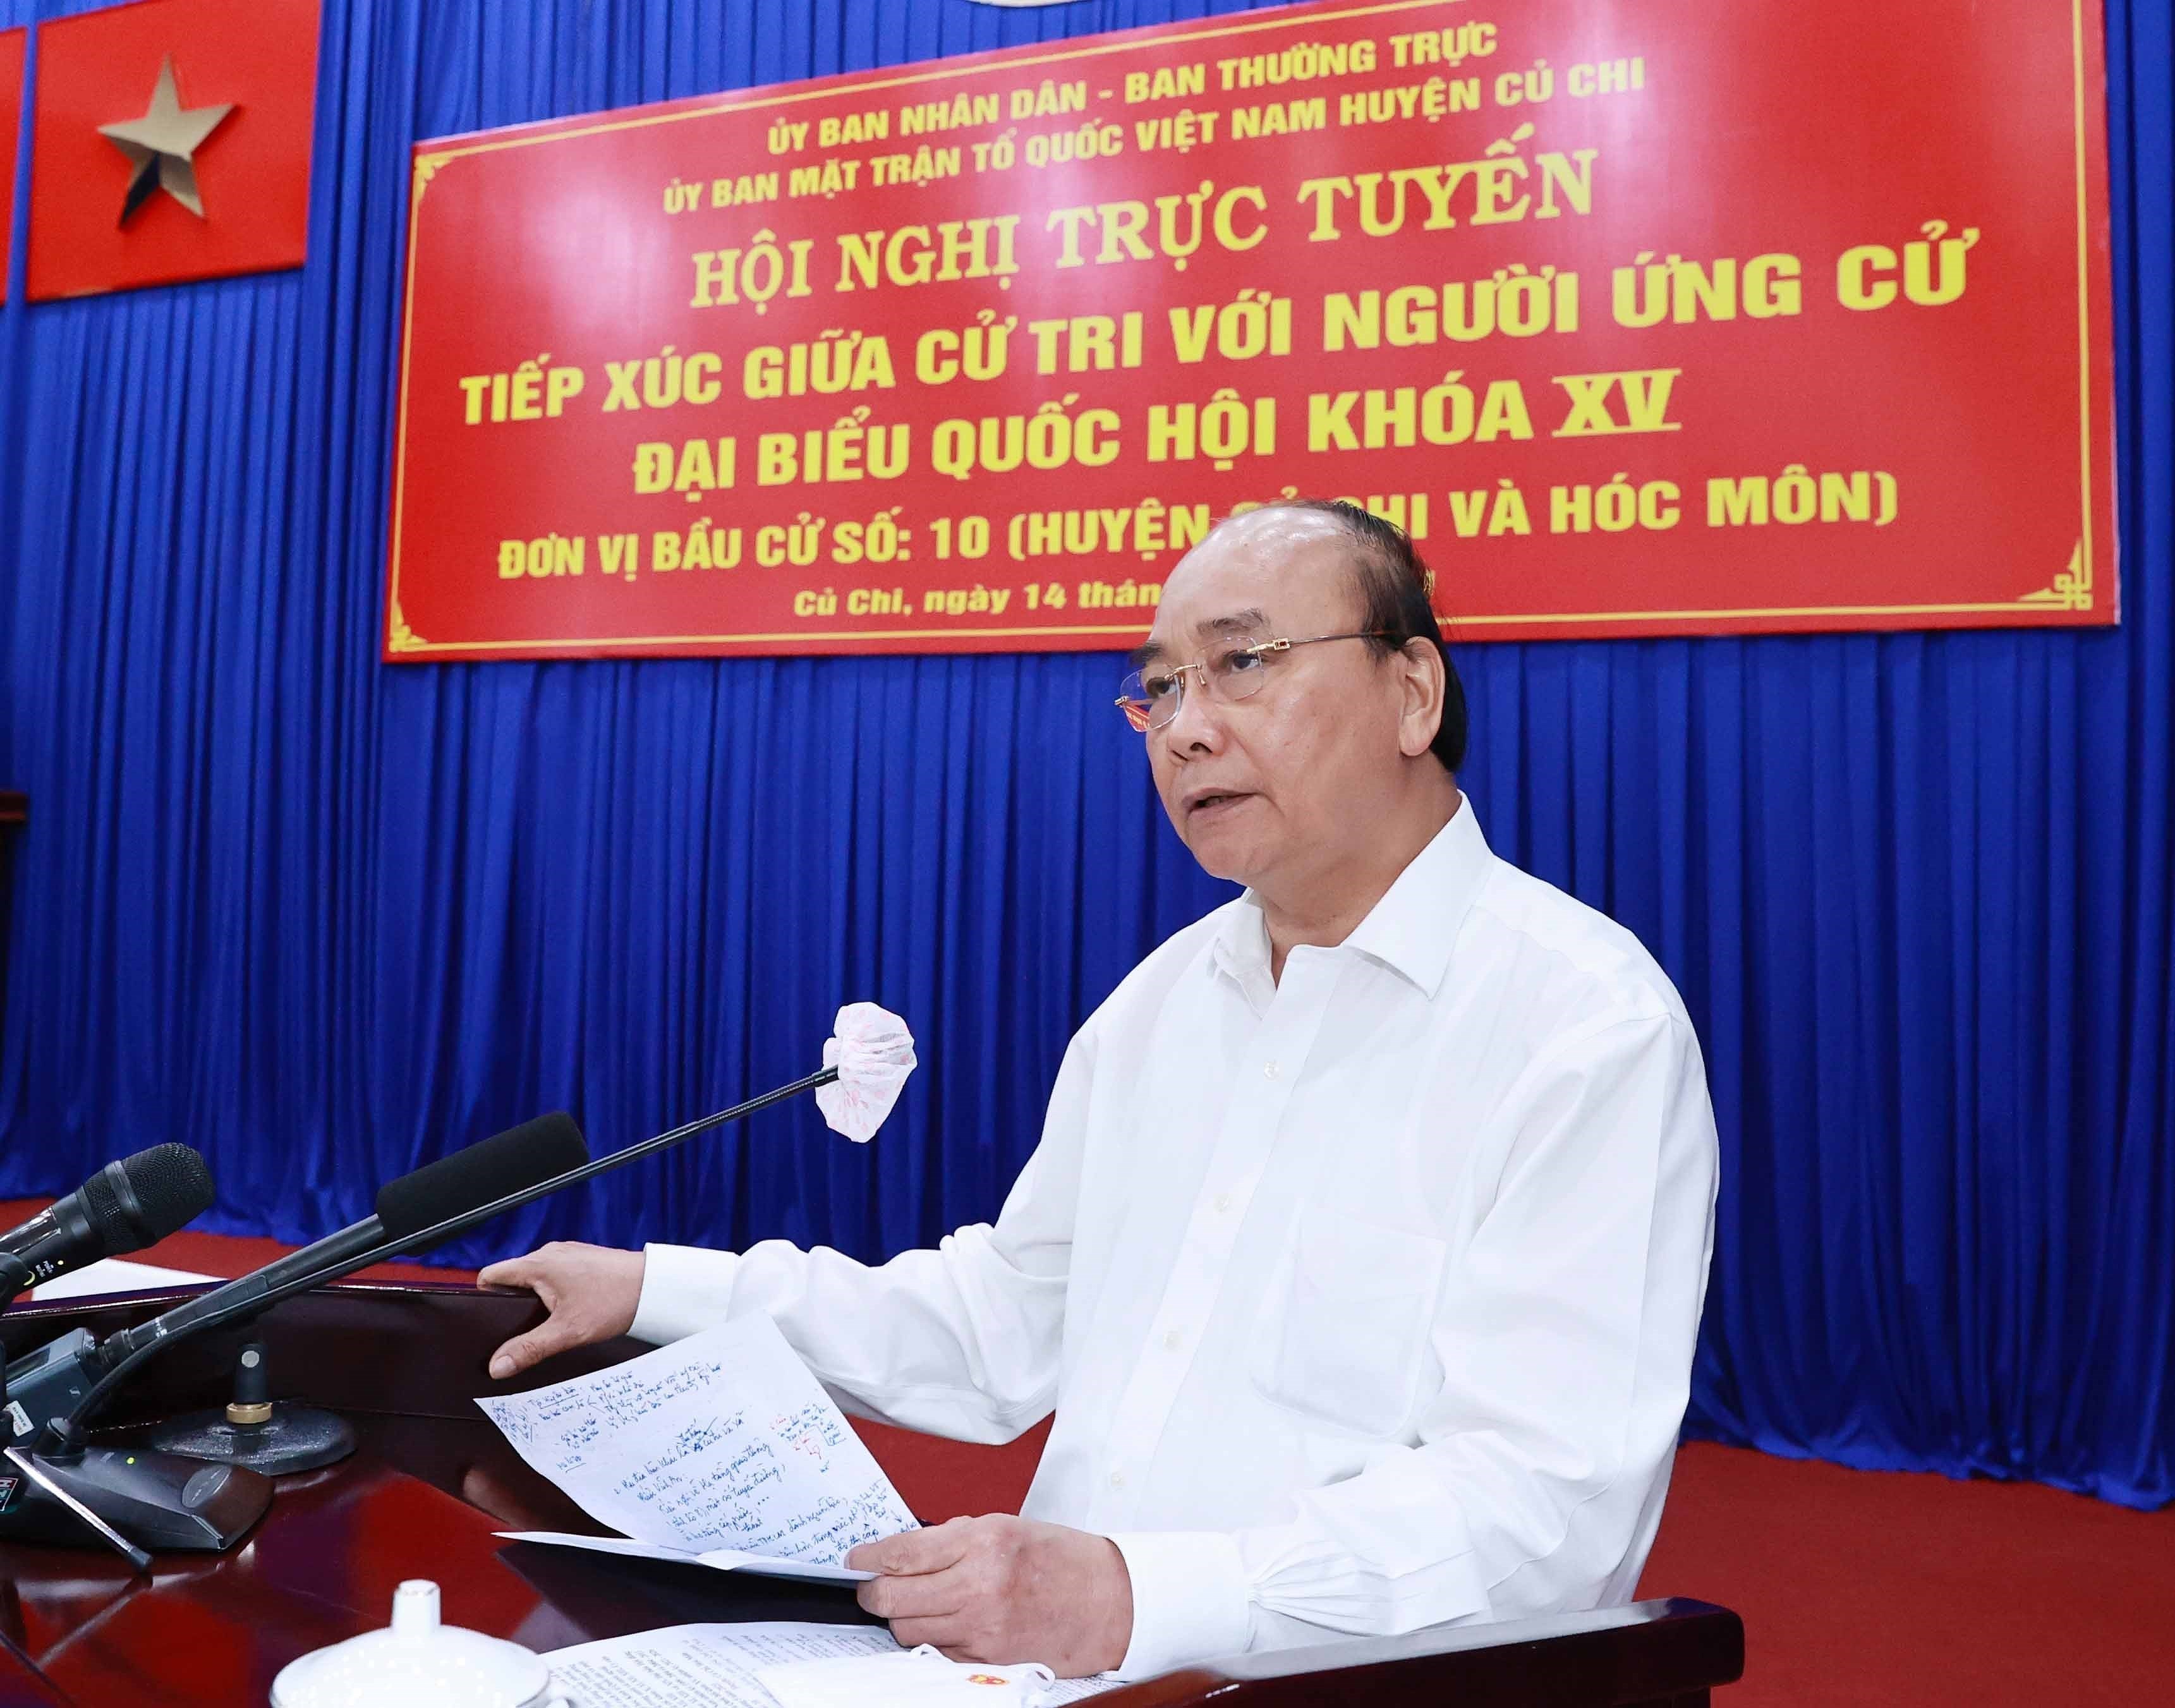 State President meets with Ho Chi Minh City’s voters hinh anh 3